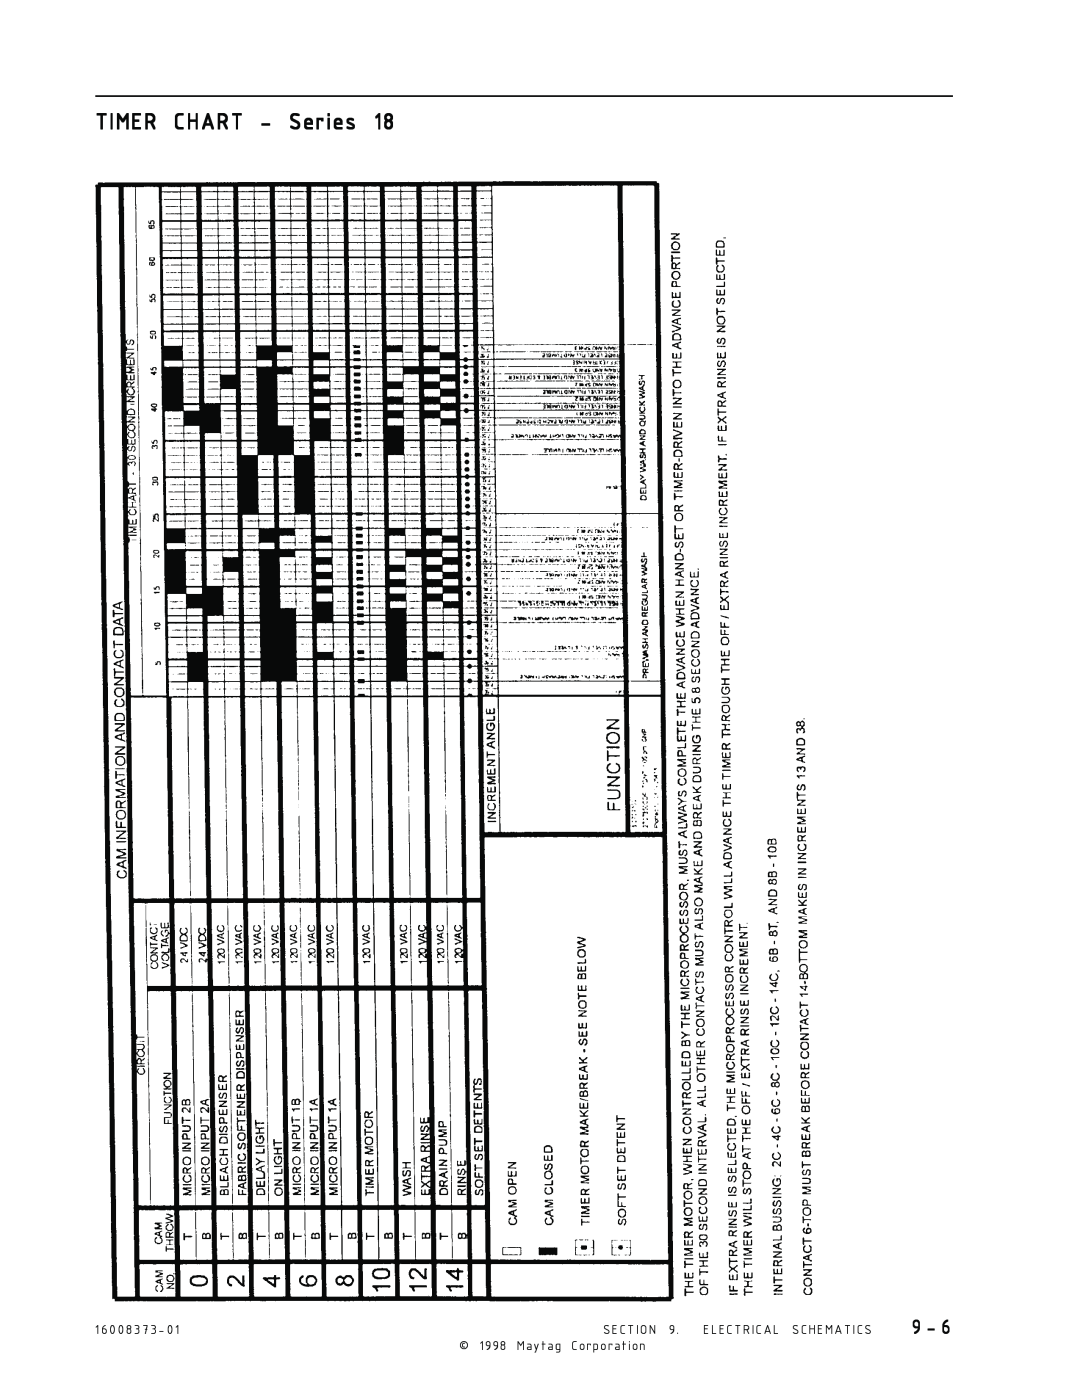 Whirlpool MAH3000 TIMER CHART - Series, Section, Electrical Schematics, Maytag Corporation, 1 6 0 0 8 3 7 3 - 0 